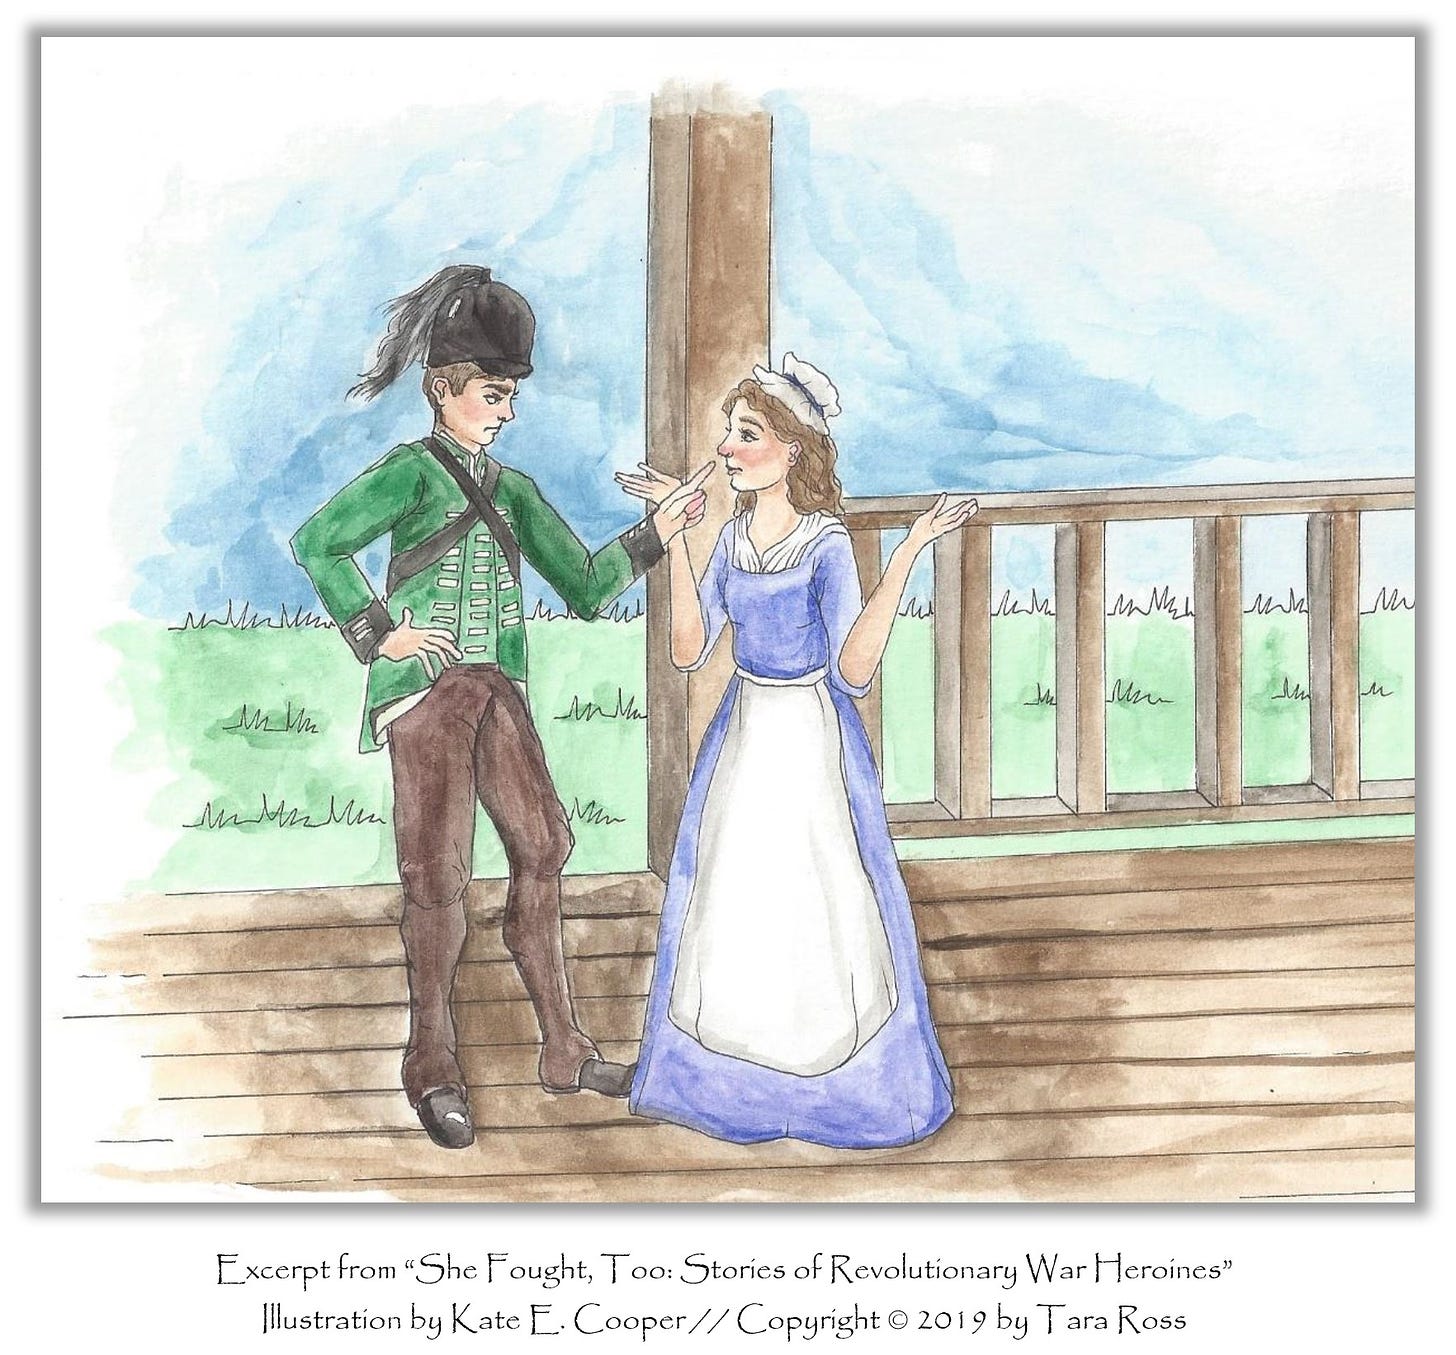 Illustration depicting Martha Bratton. The illustration is an excerpt from “She Fought, Too: Stories of Revolutionary War Heroines” Illustration by Kate E. Cooper // Copyright © 2019 by Tara Ross.